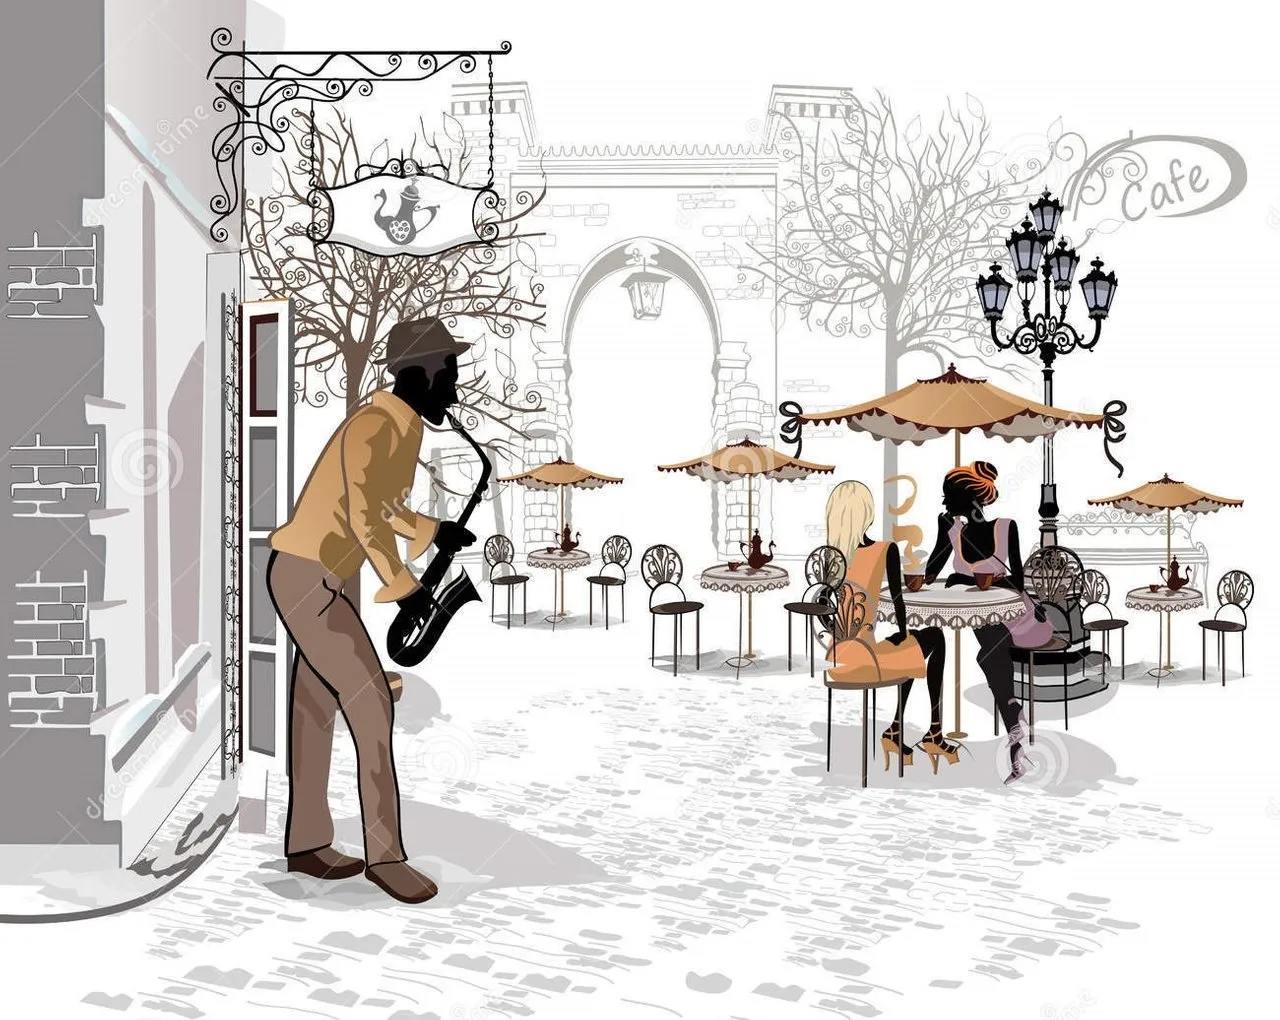 series_streets_musicians_old_city_sketches_beautiful_cafes_people_68540735.jpg